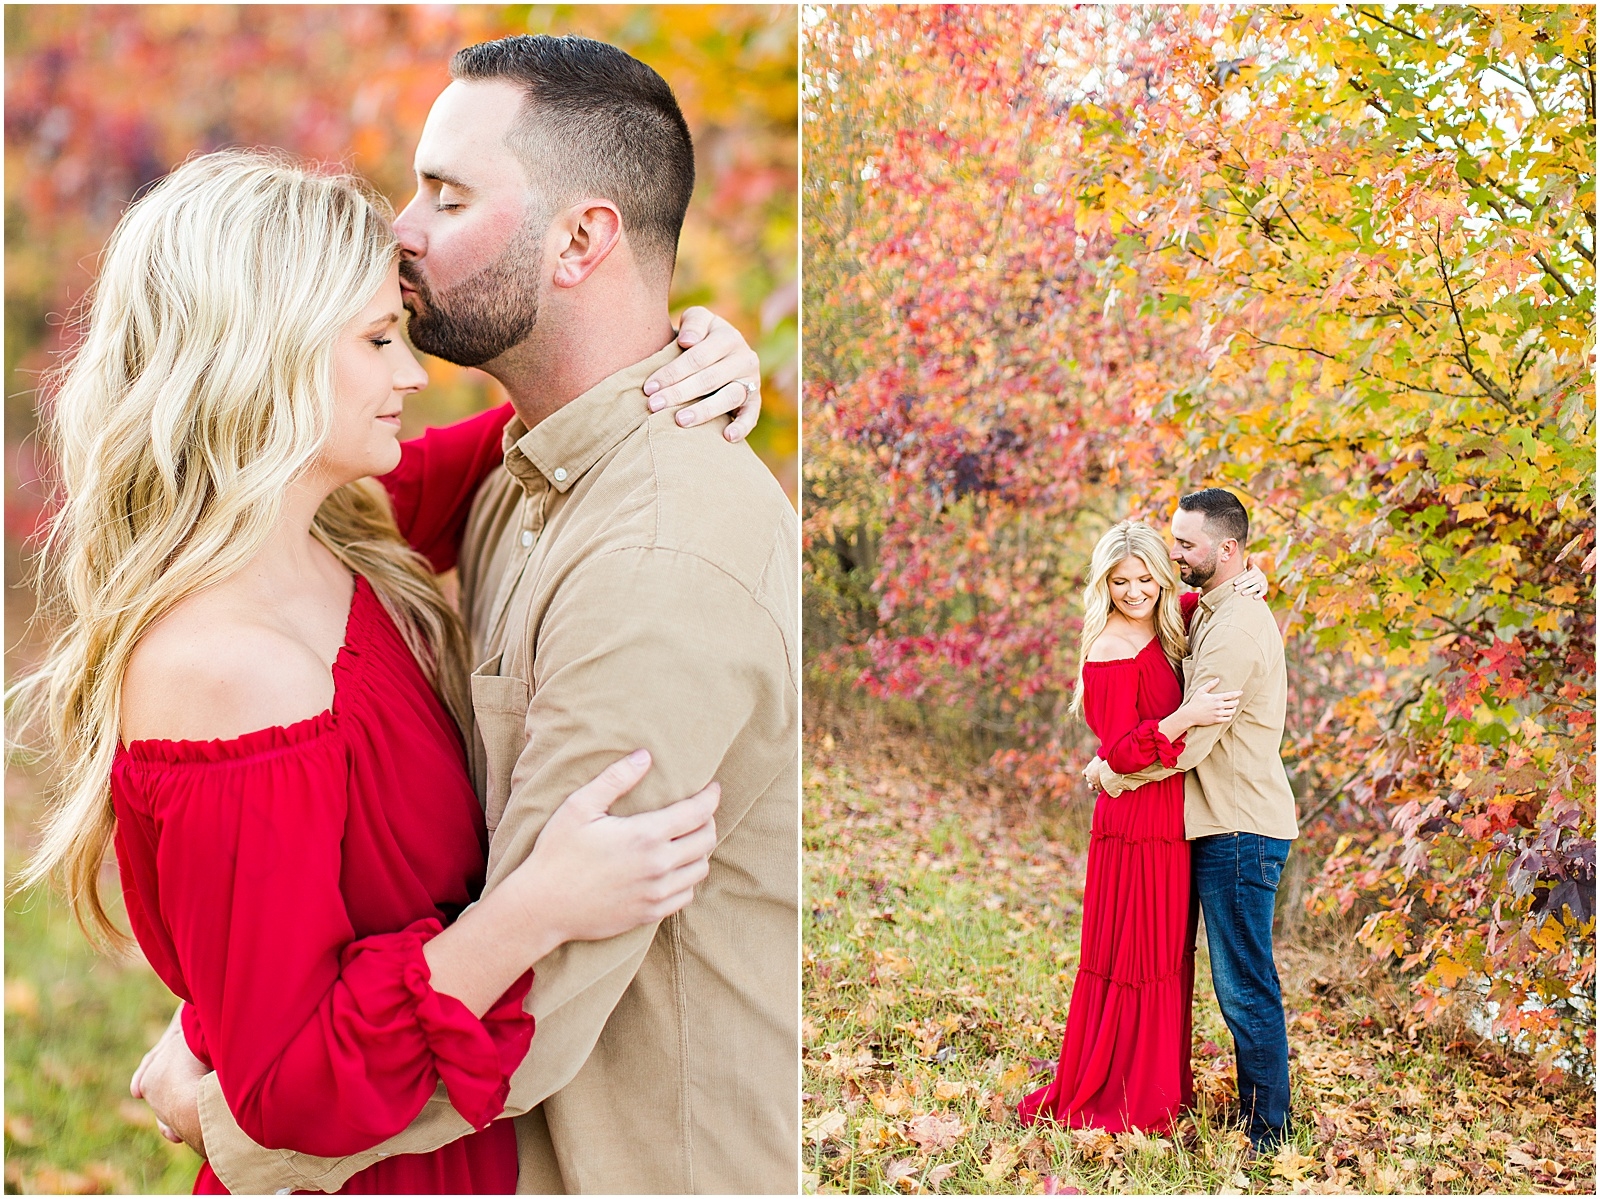 A Southern Indiana Engagement Session | Charleston and Erin | Bret and Brandie Photography038.jpg